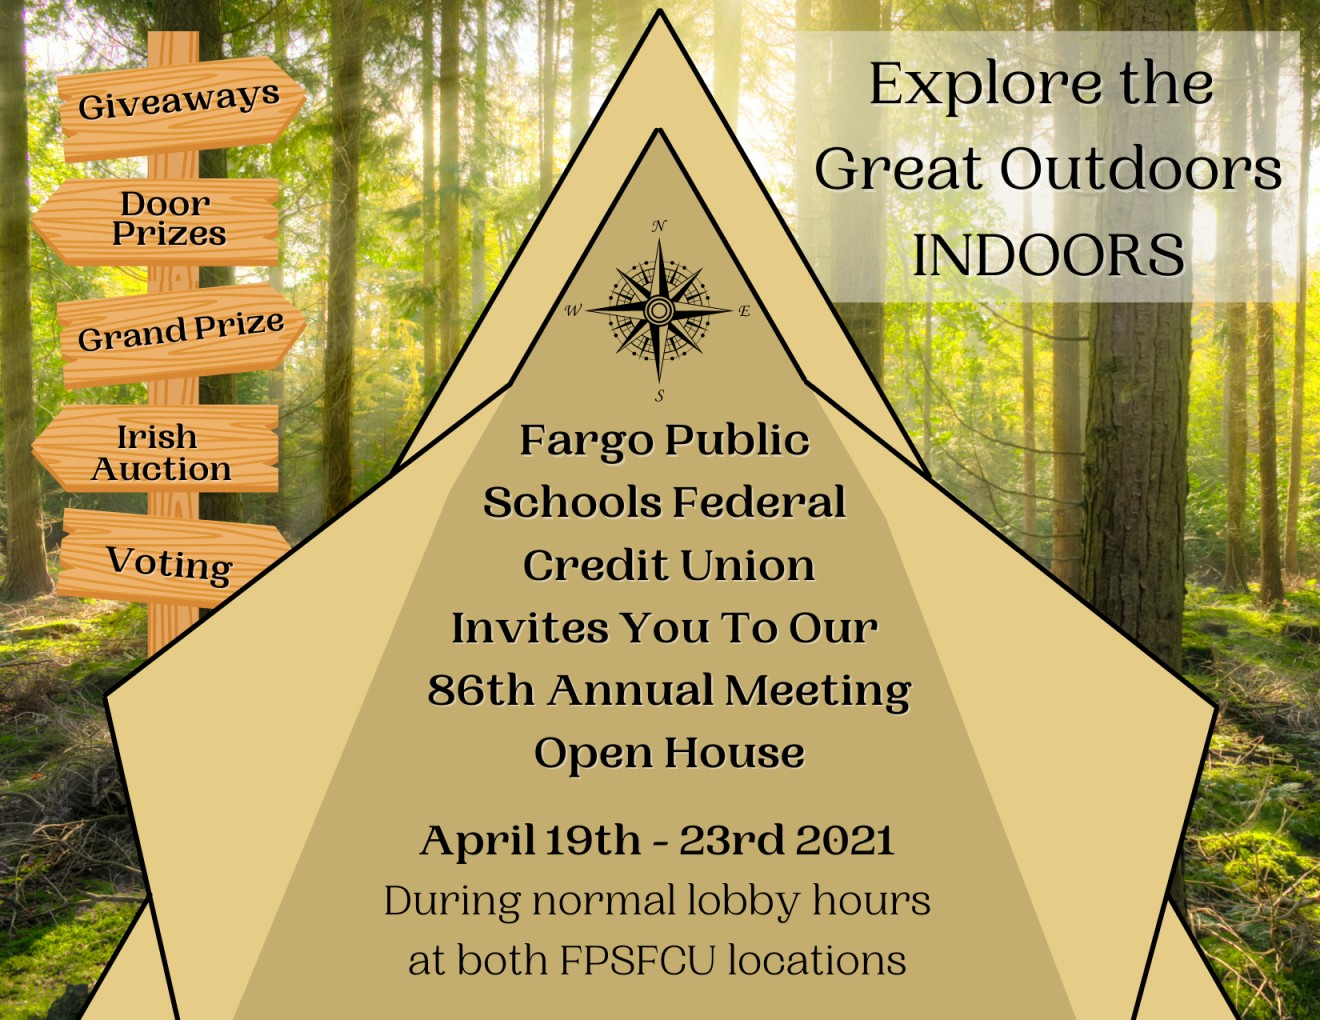 Tent in the woods with open doors, inside: Fargo Public Schools Federal Credit Union Invites you to our 86th Annual meeting open house. April 19th-23rd 2021 during normal lobby hours at both FPSFCU locations. Explore the great outdoors indoors! Post with the following signs on it: giveaways, door prizes, grand prize, irish auction, voting